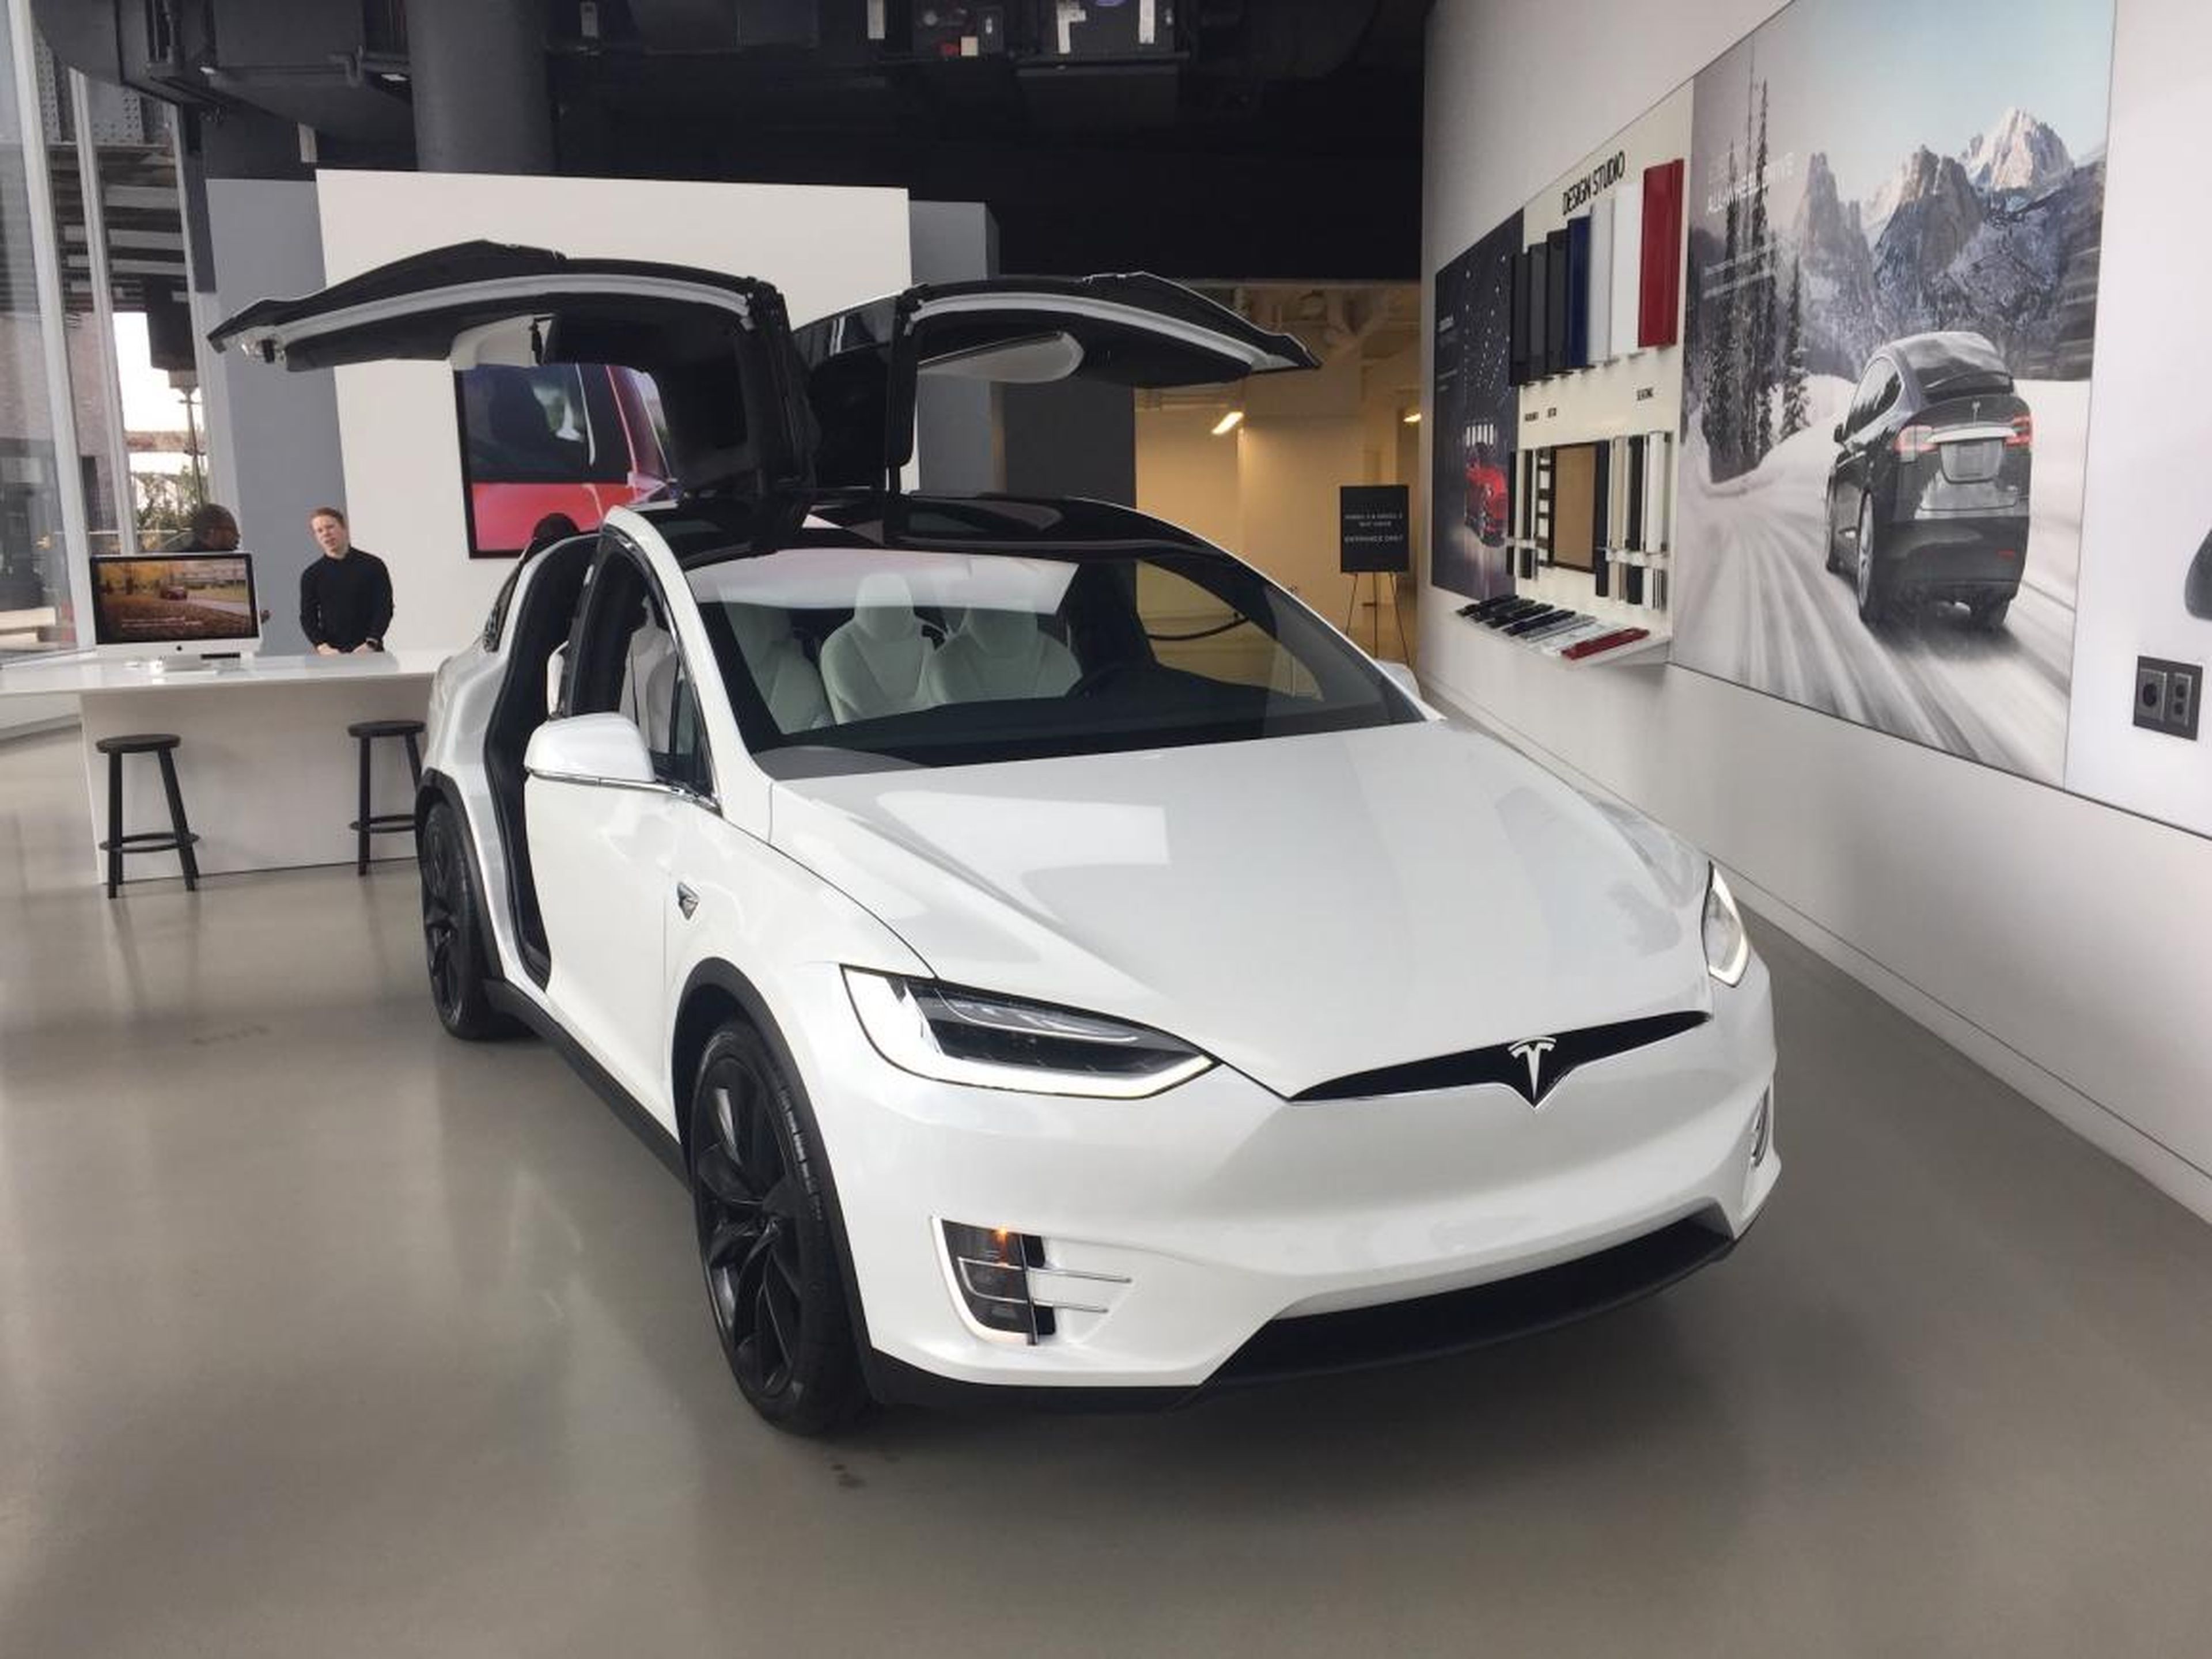 Jobs also predicted car dealerships without inventory — which Tesla does today.